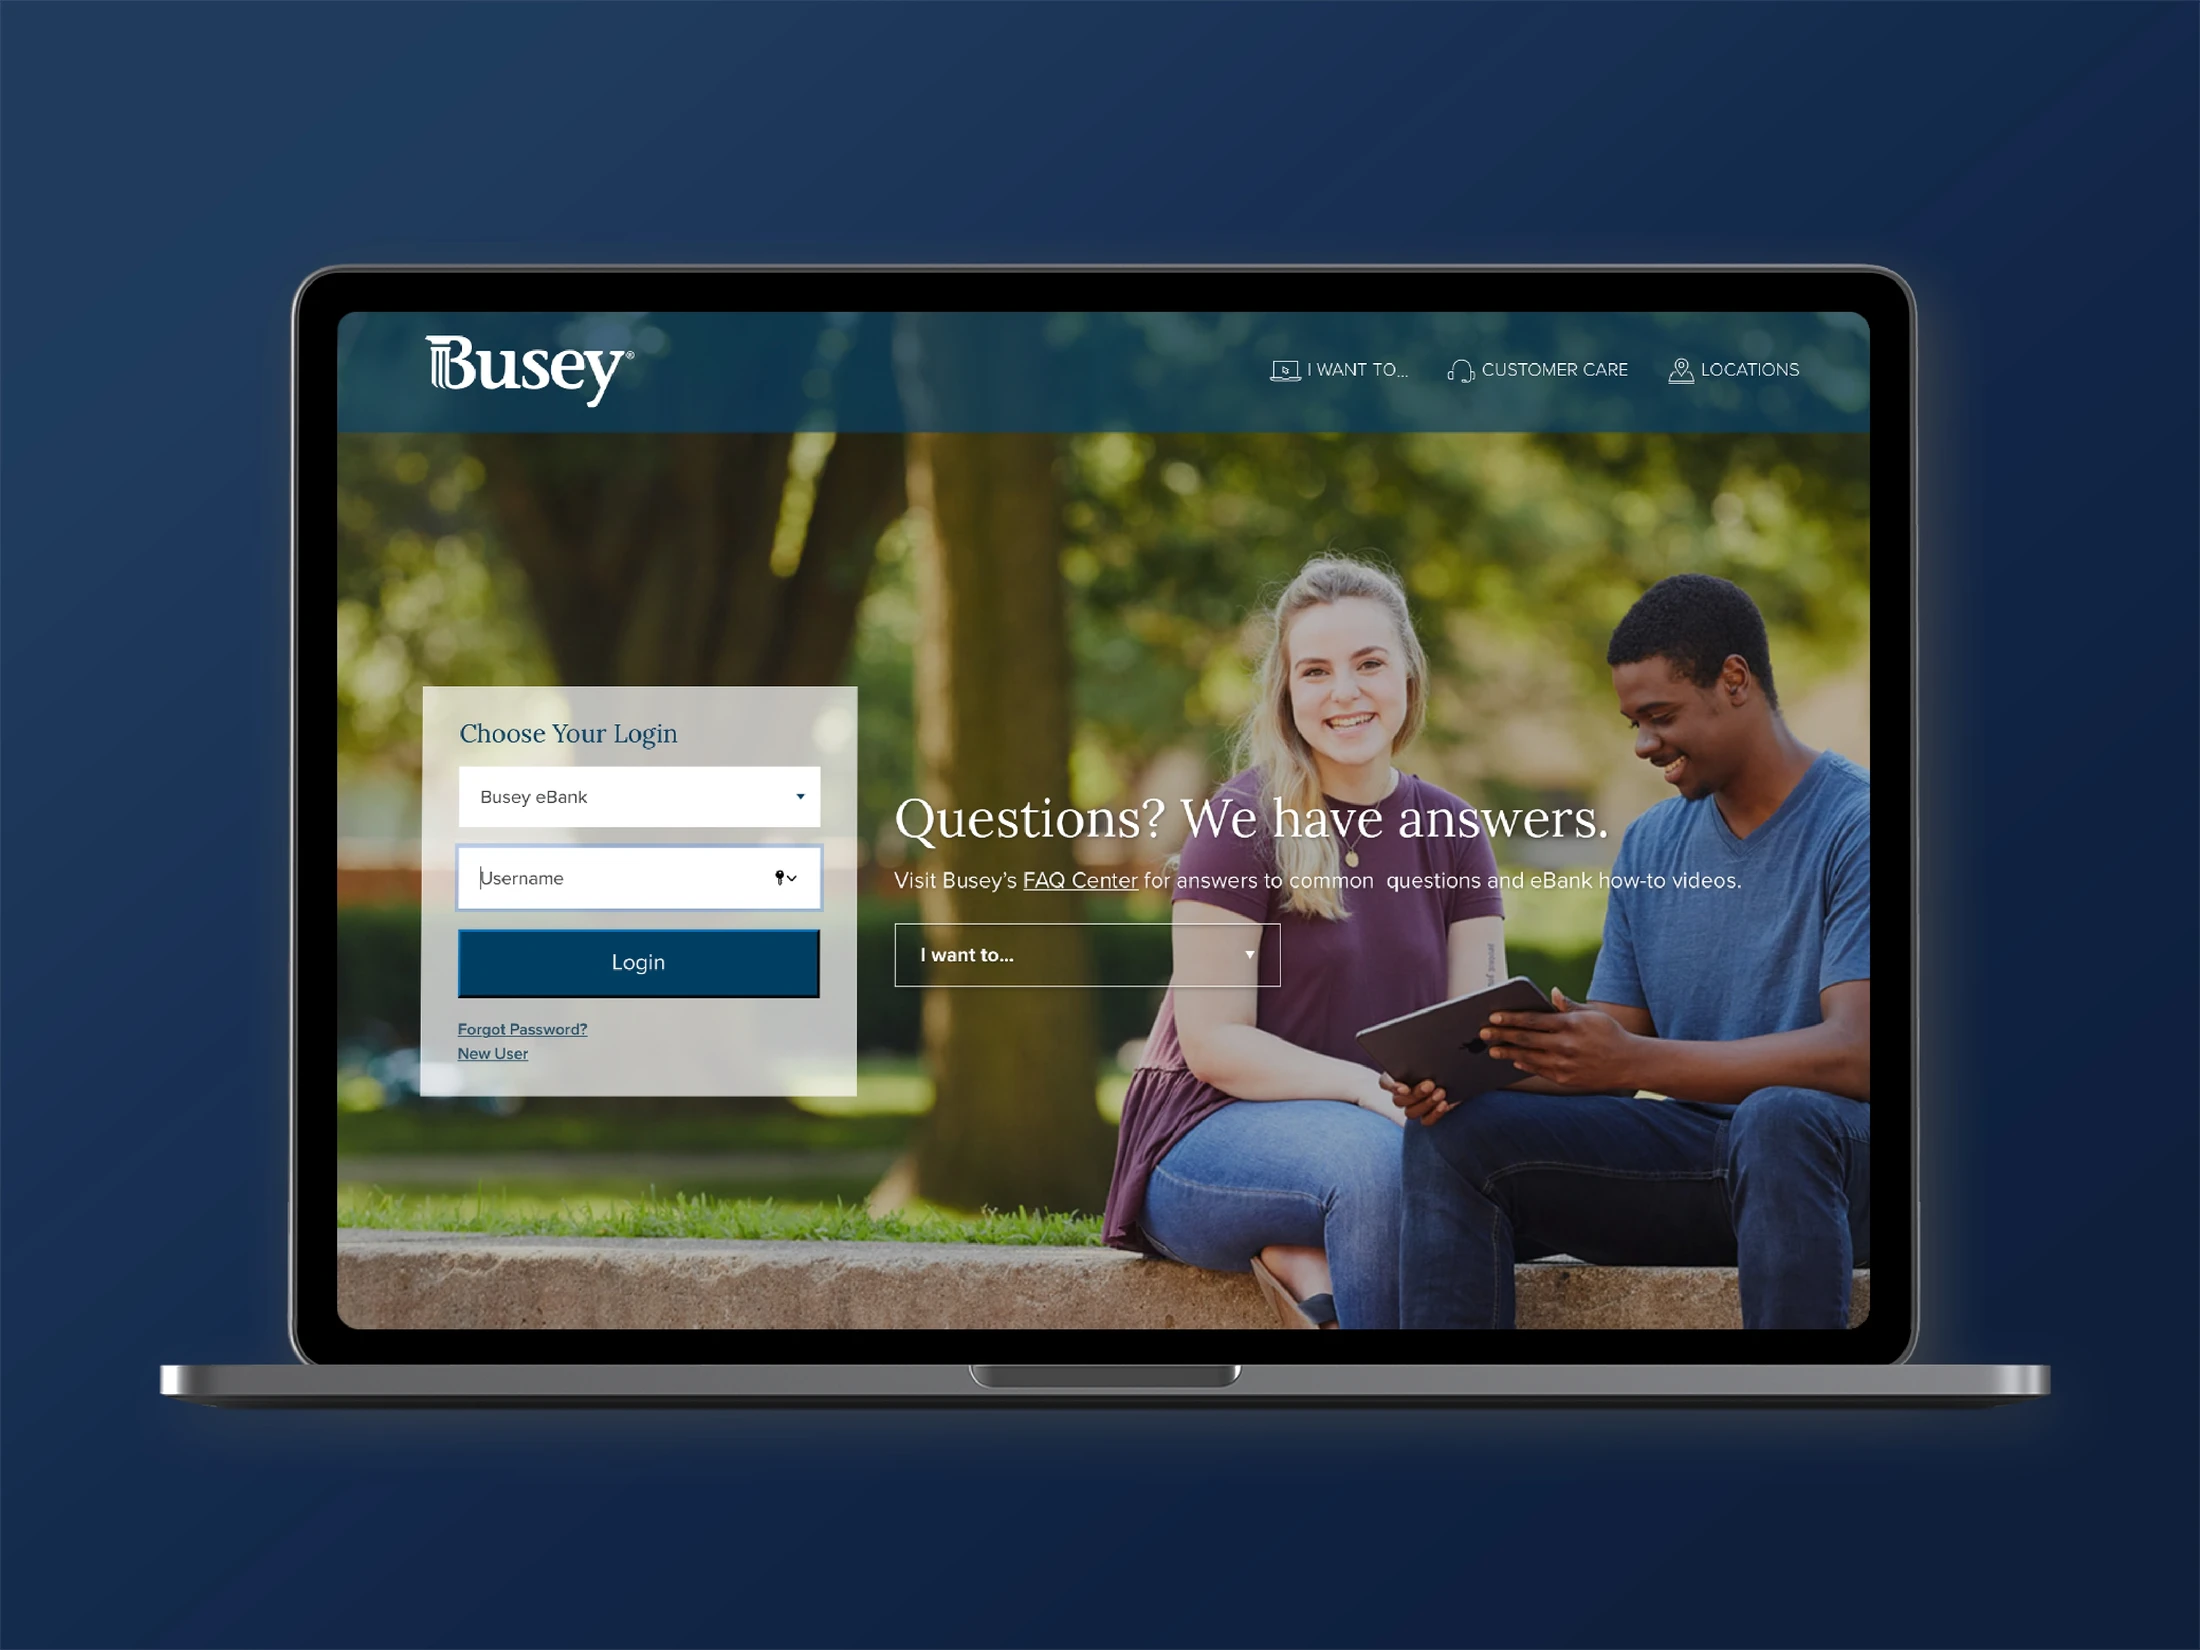 Bussey's new website is displayed on a laptop.